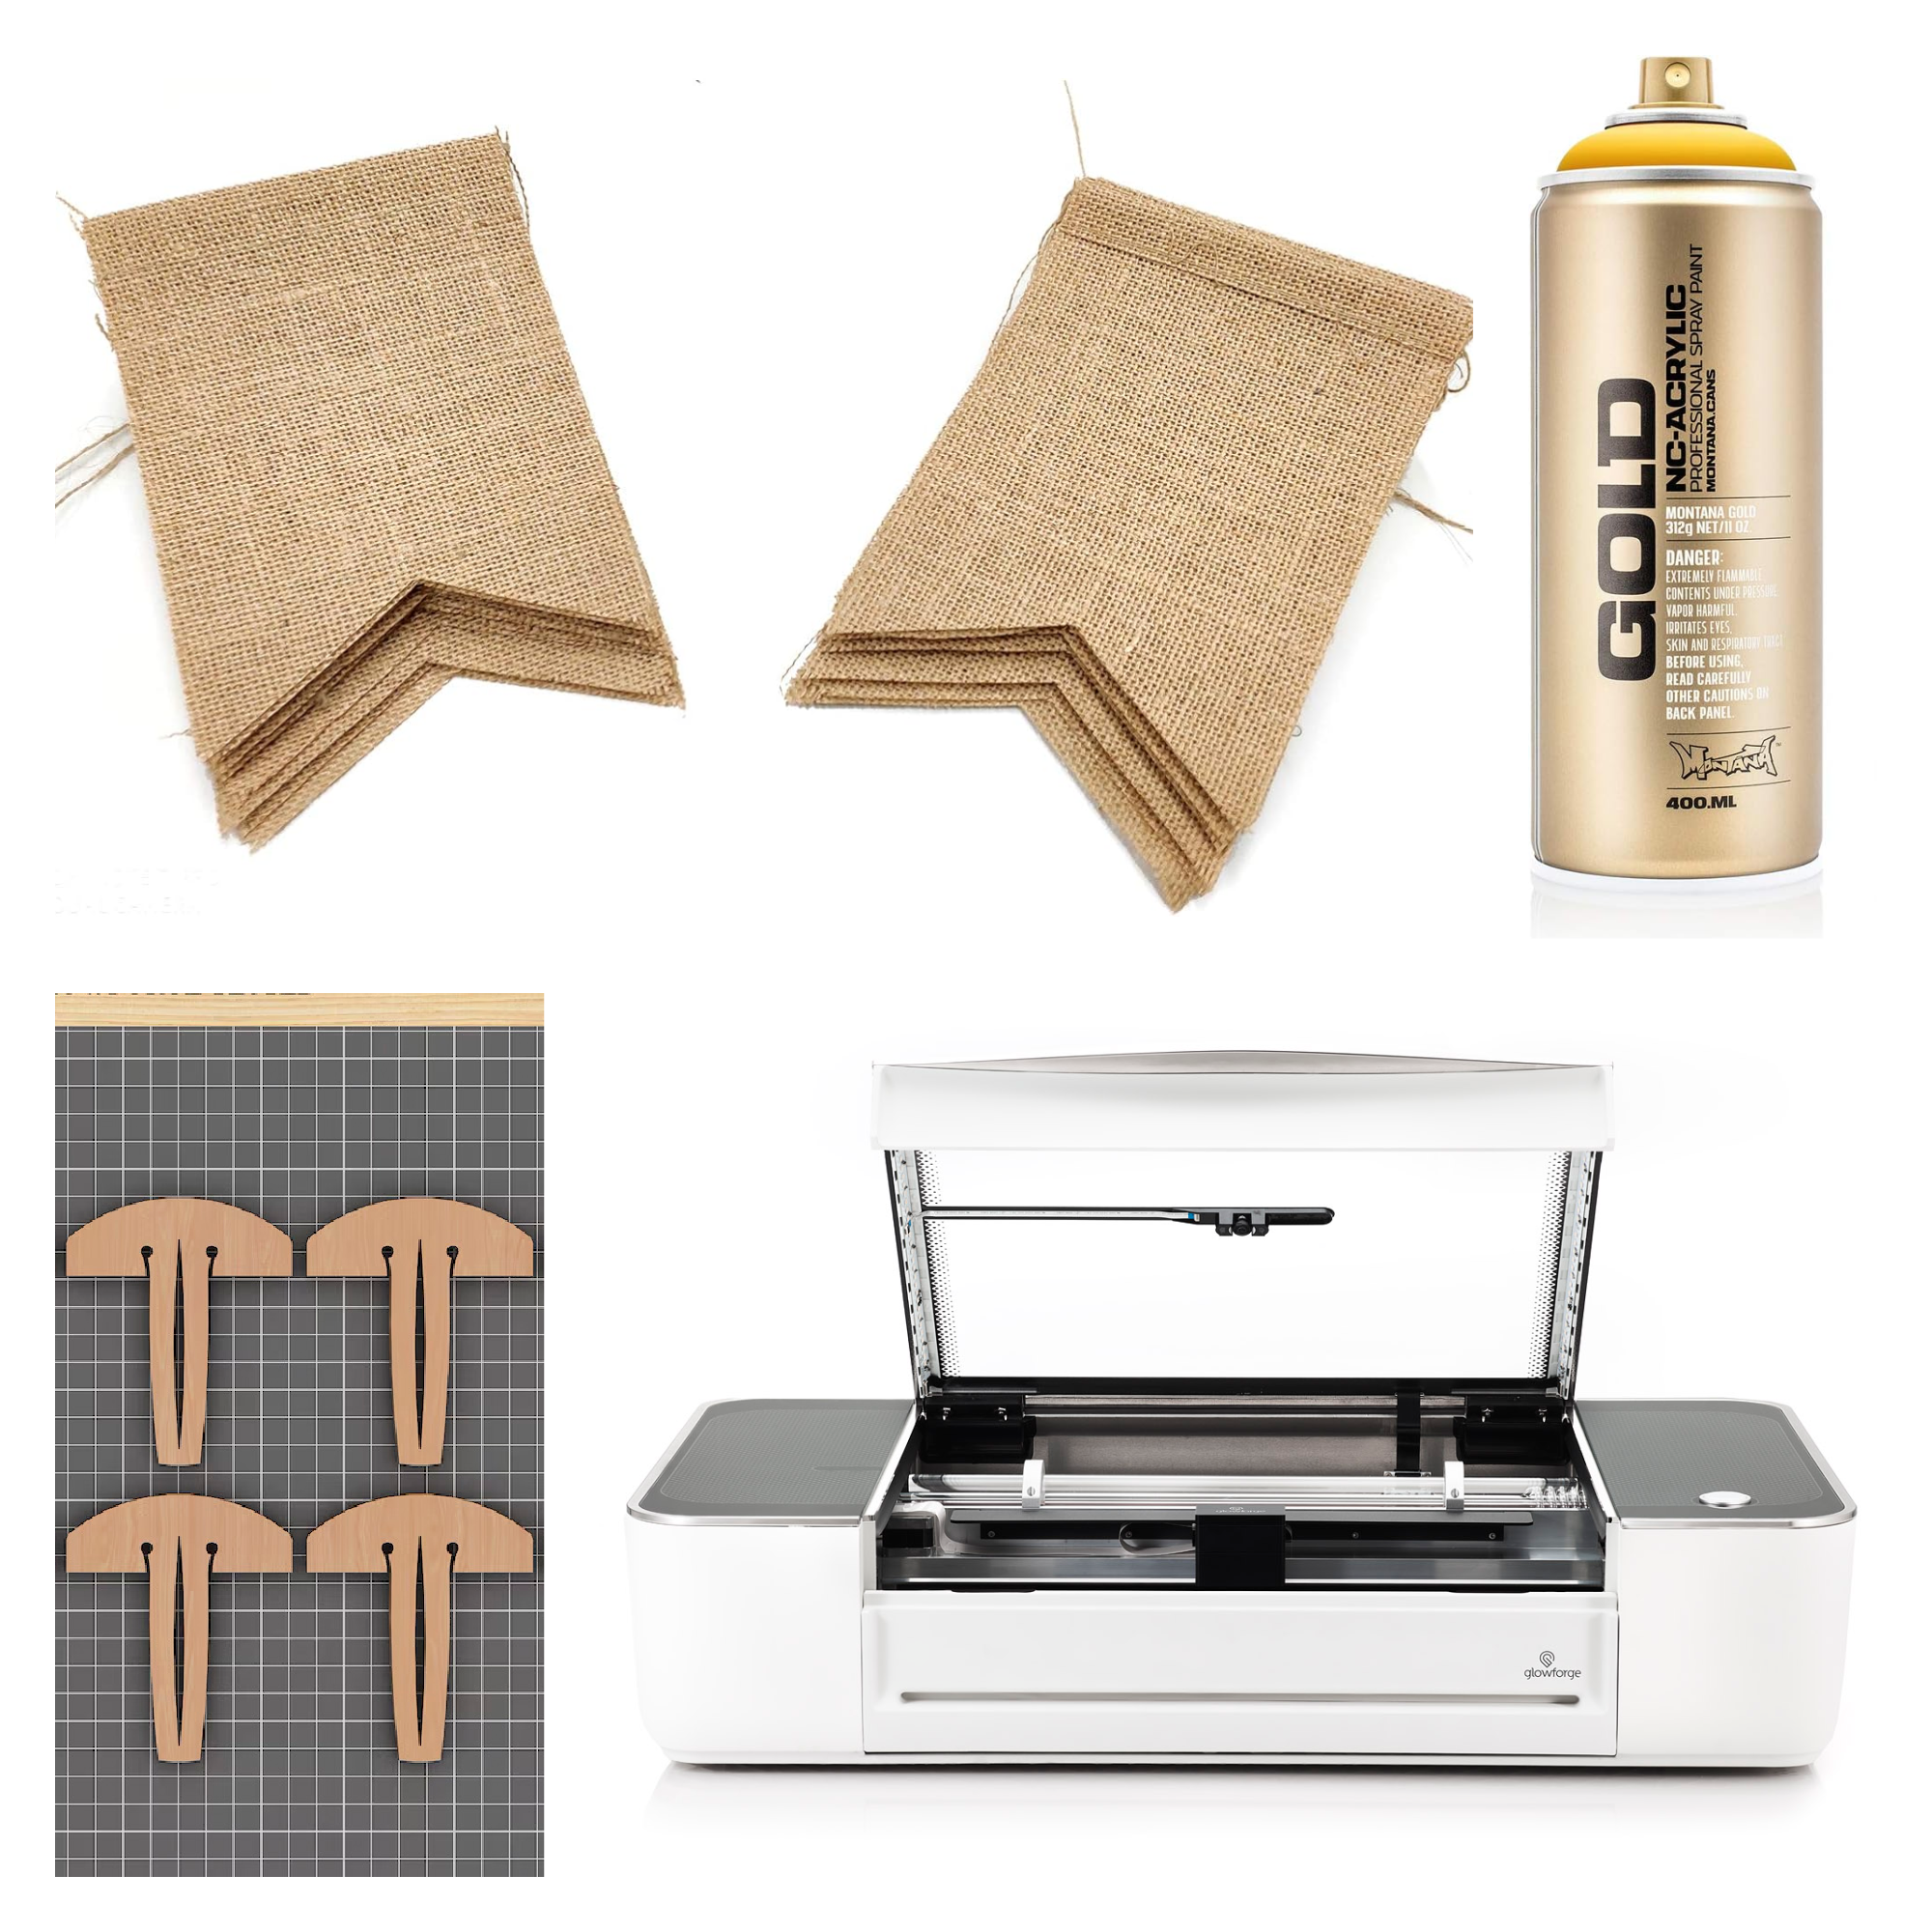 Engraved Burlap Banner Supplies graphic - banner, spray paint, Glowforge Pro, and hold down pins on white background